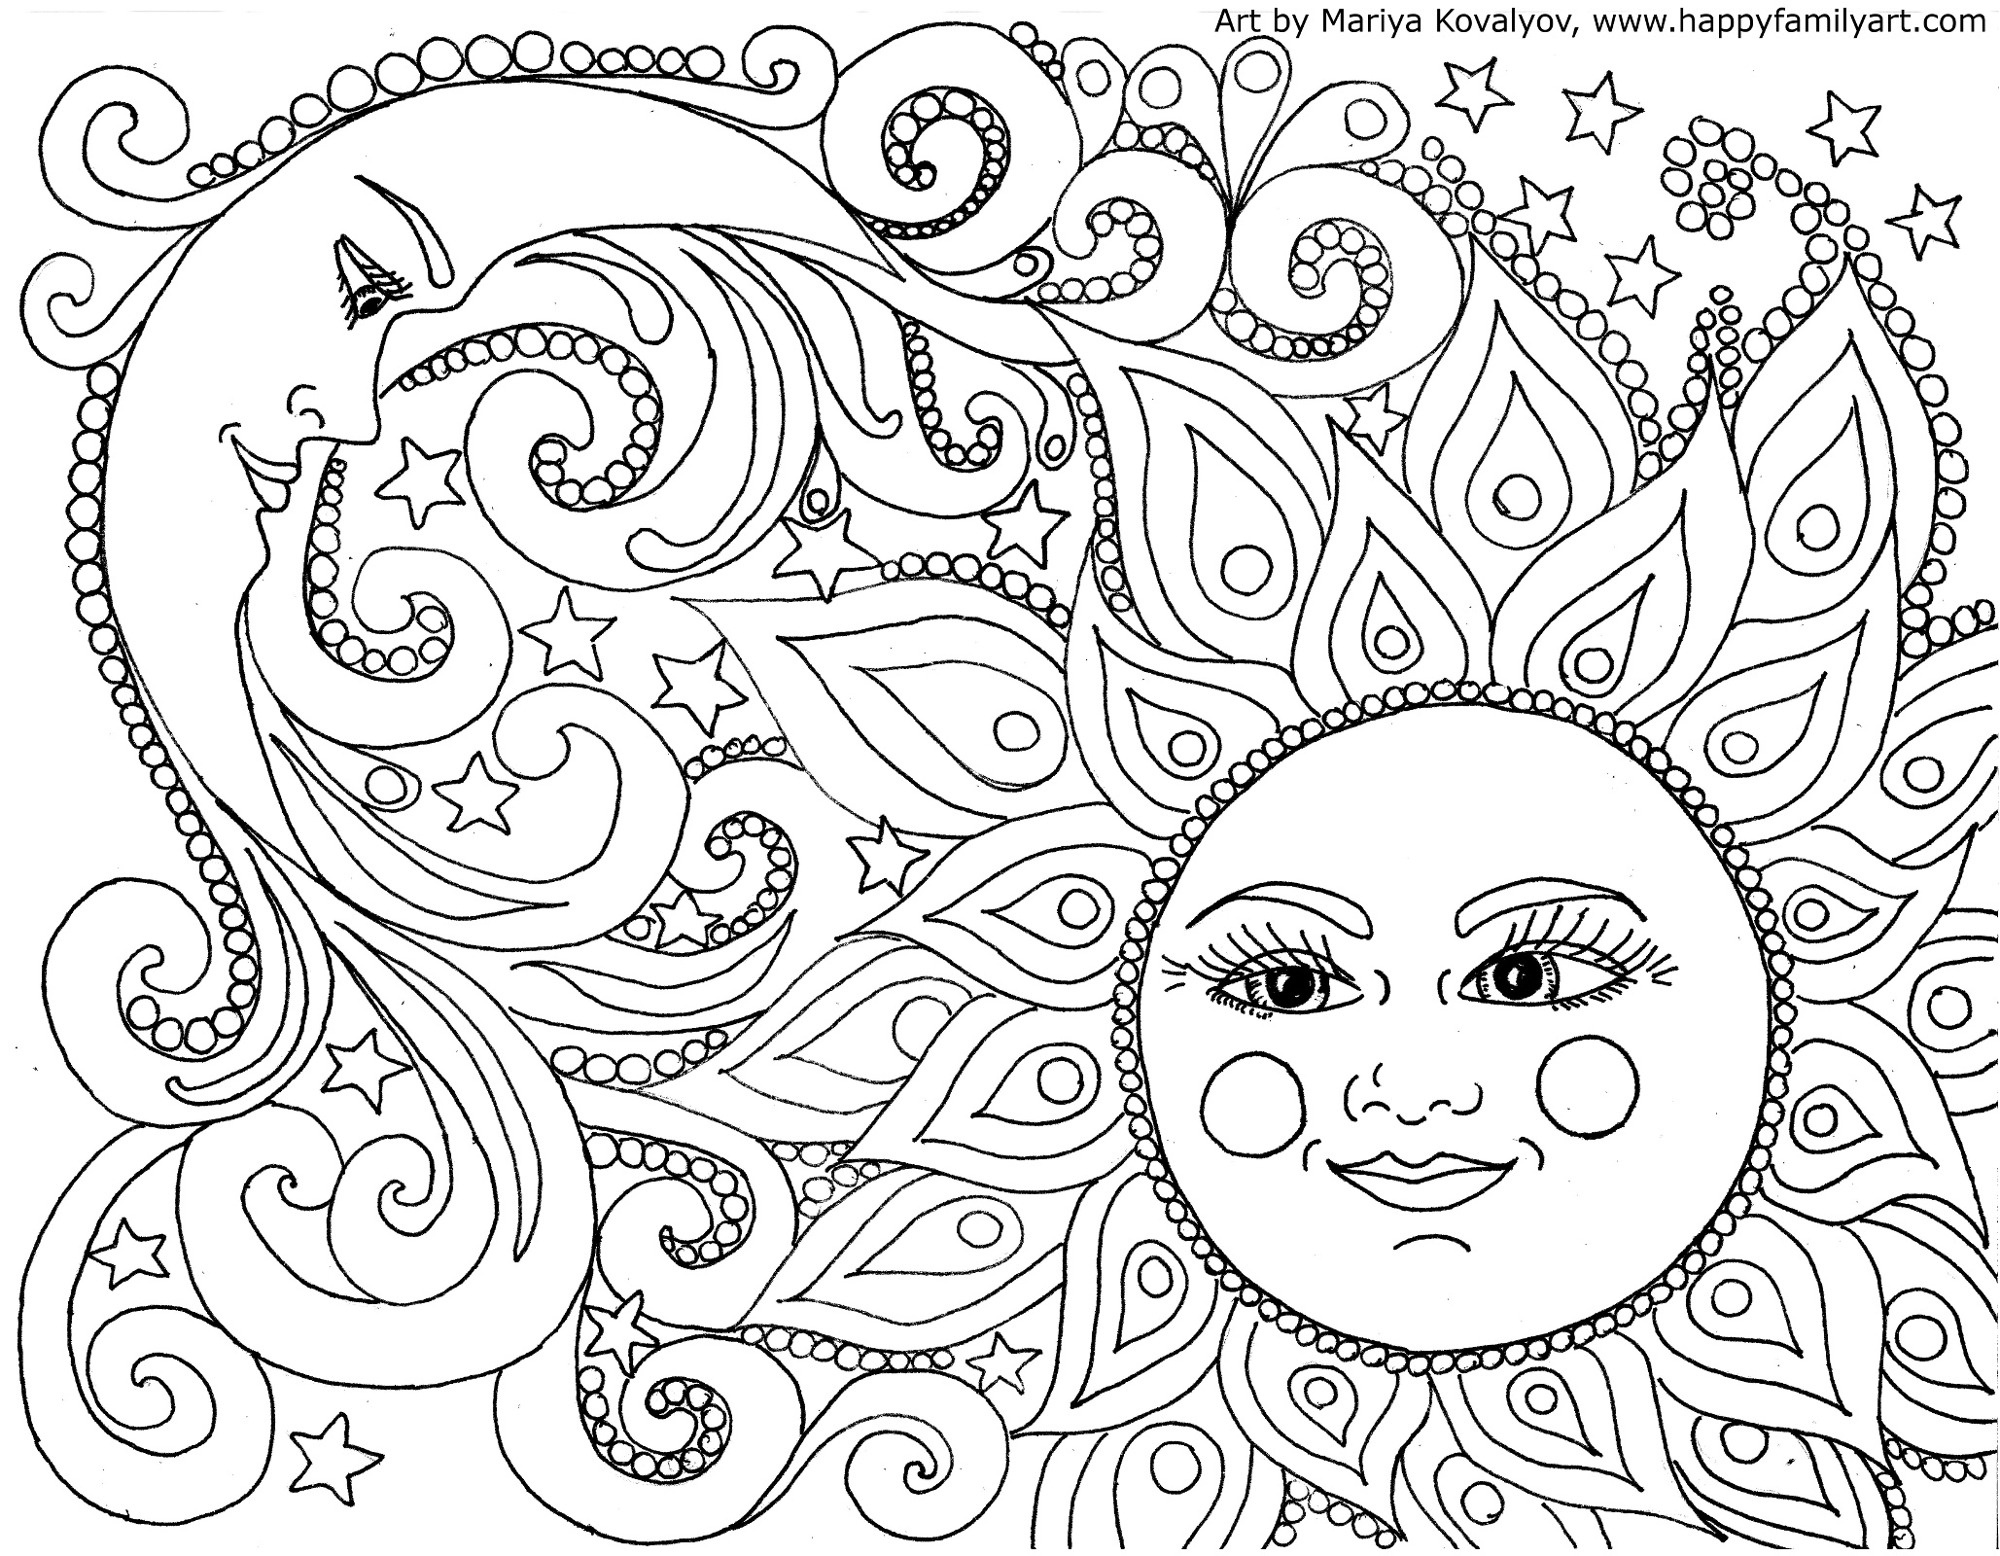 Happy Family Art - Original And Fun Coloring Pages - Free Printable Coloring Pages